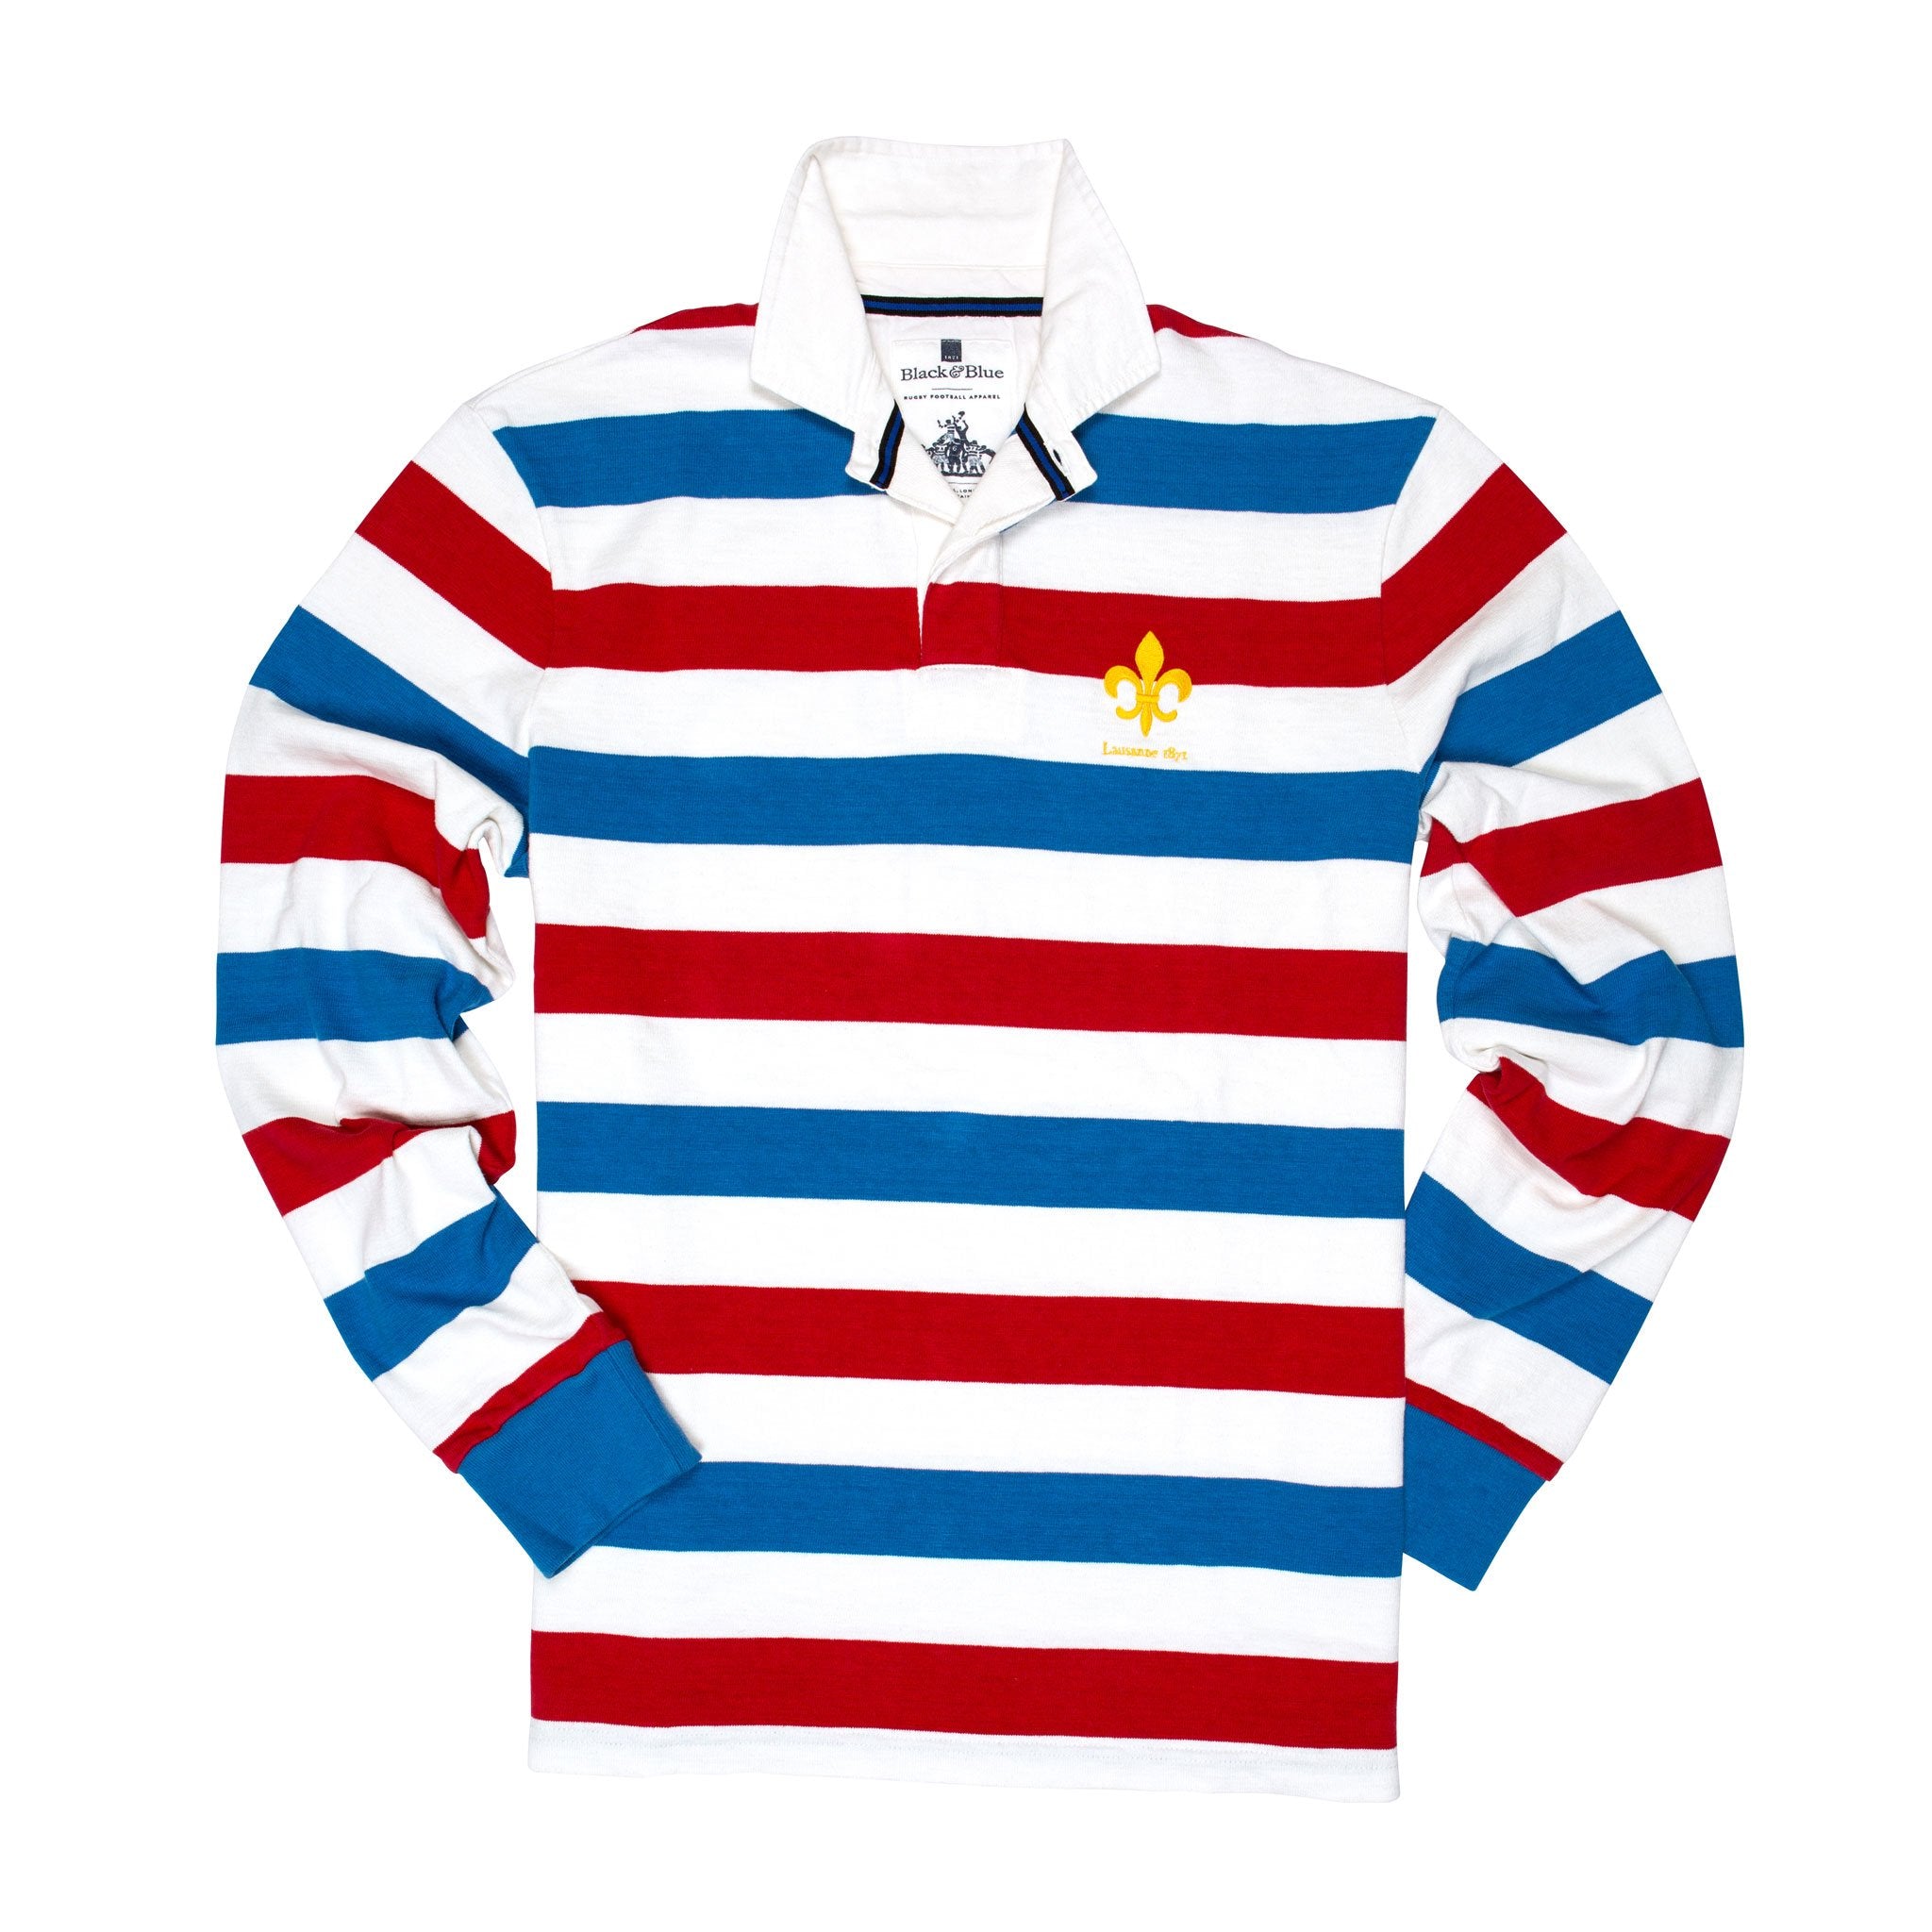 Black&Blue 1871 Founding 13 Rugby Shirts